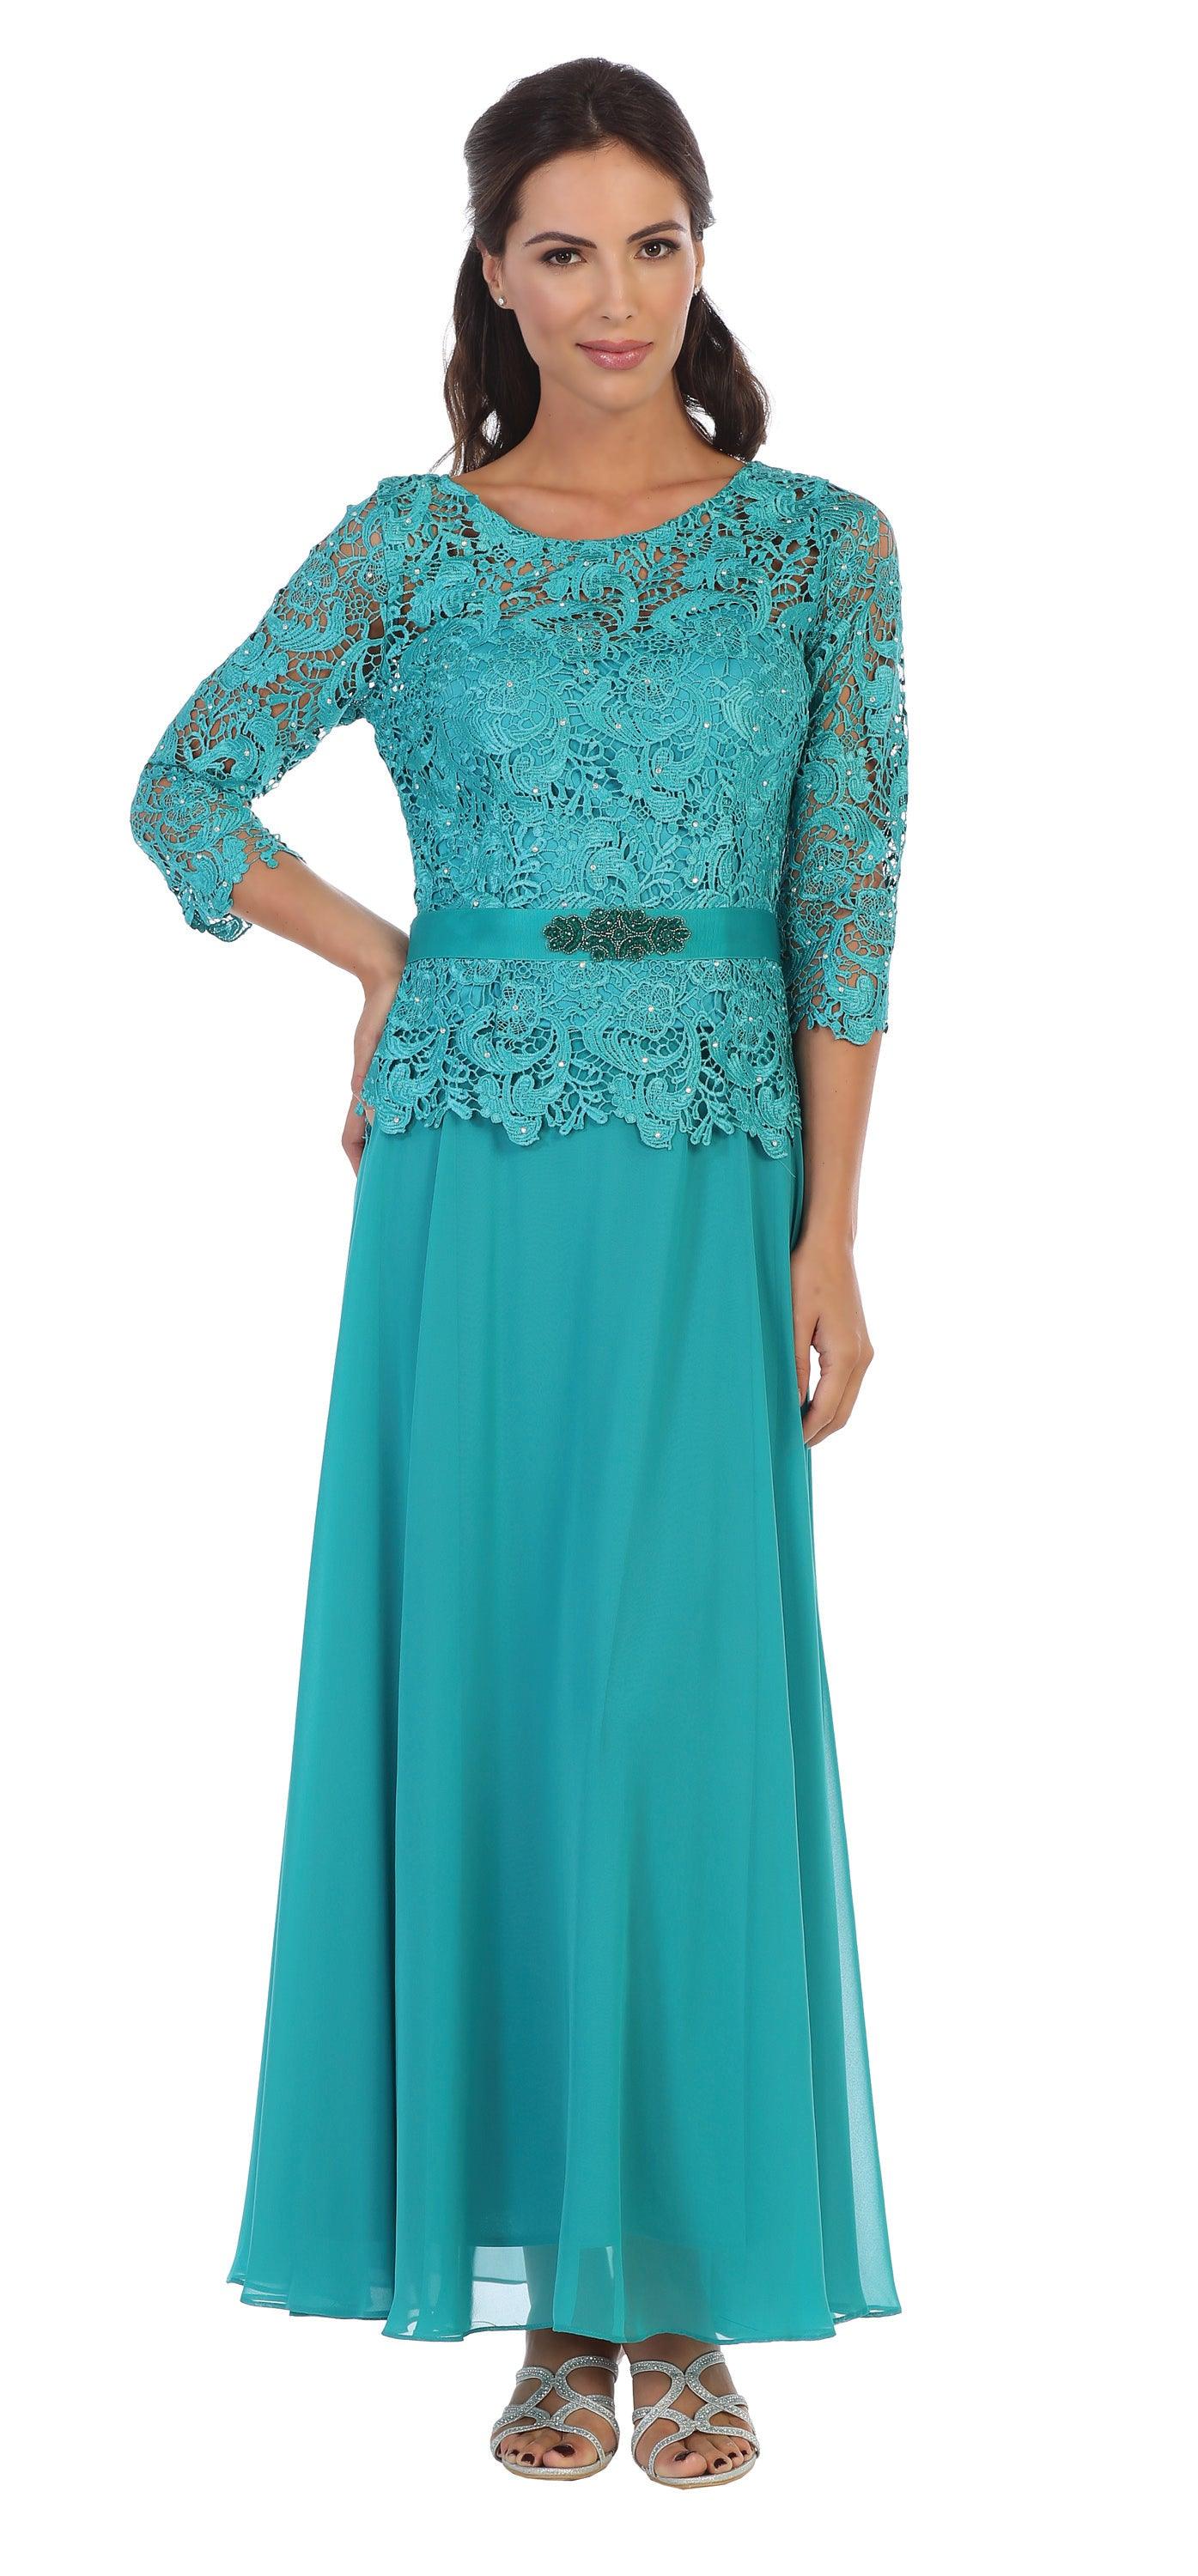 Long Mother of the Bride Lace Chiffon Formal Gown - The Dress Outlet